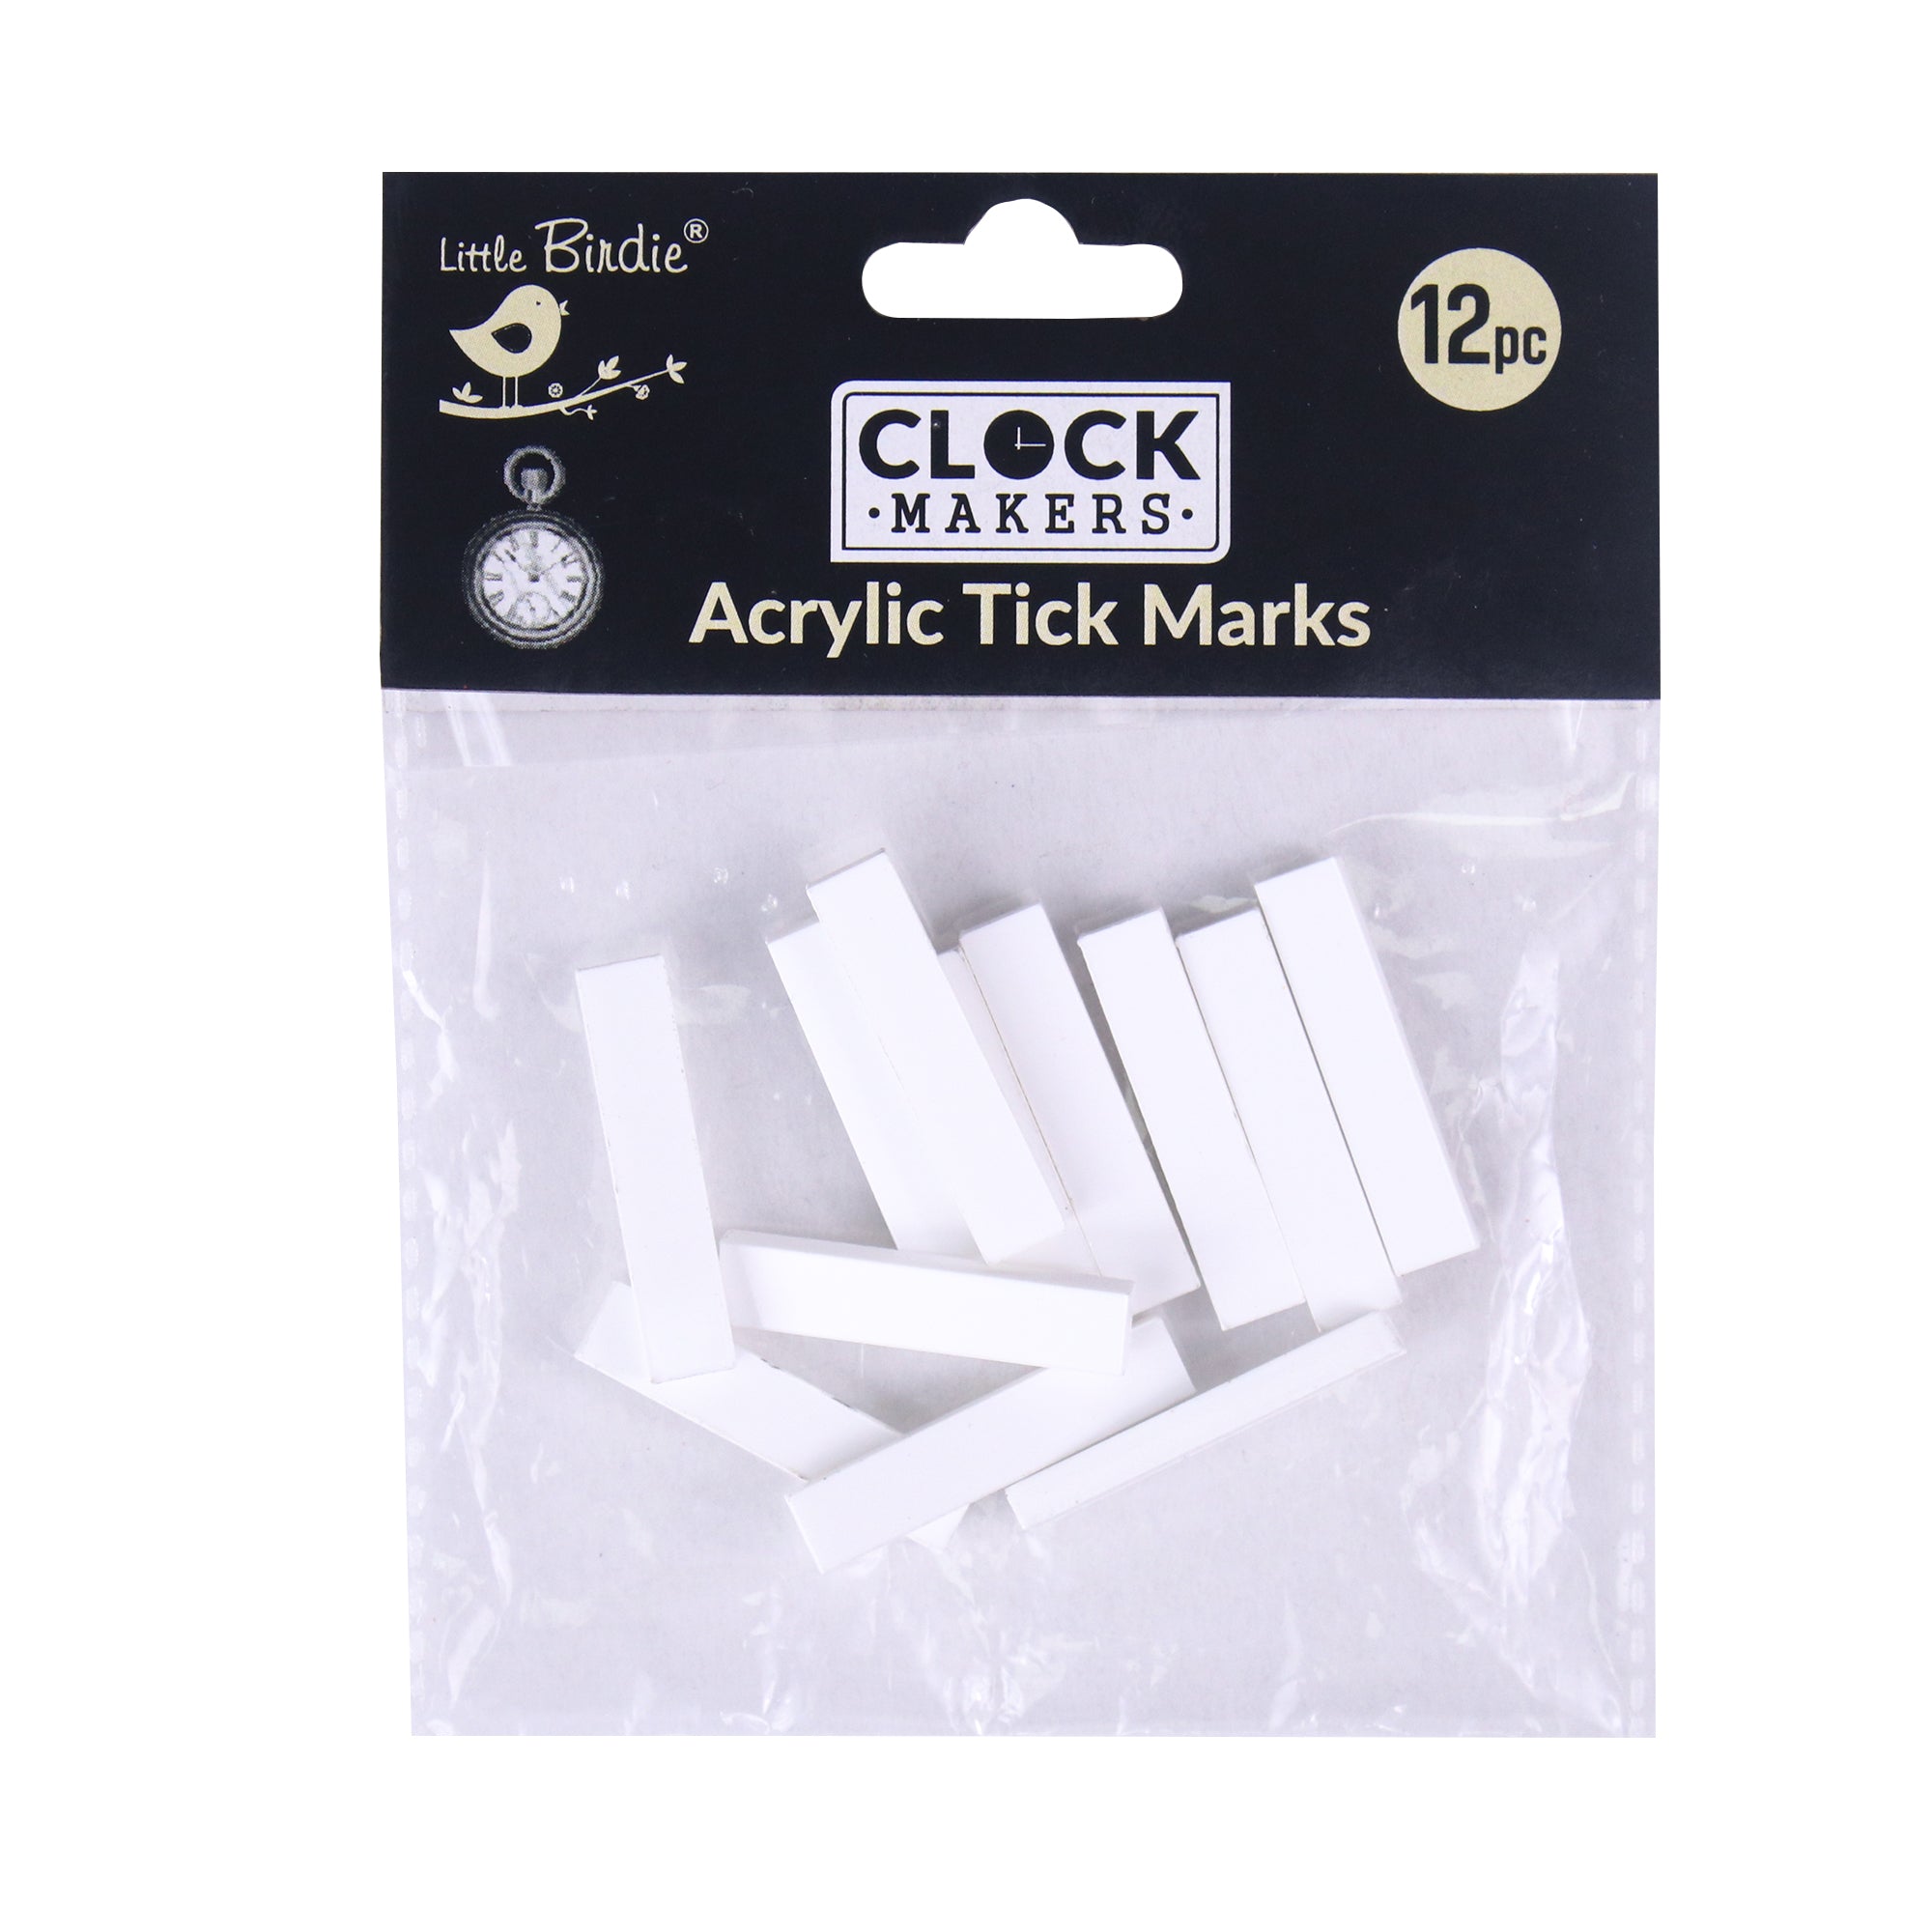 Clock Acrylic Tick Marks White 1inch 2.7mm Thick 12pc